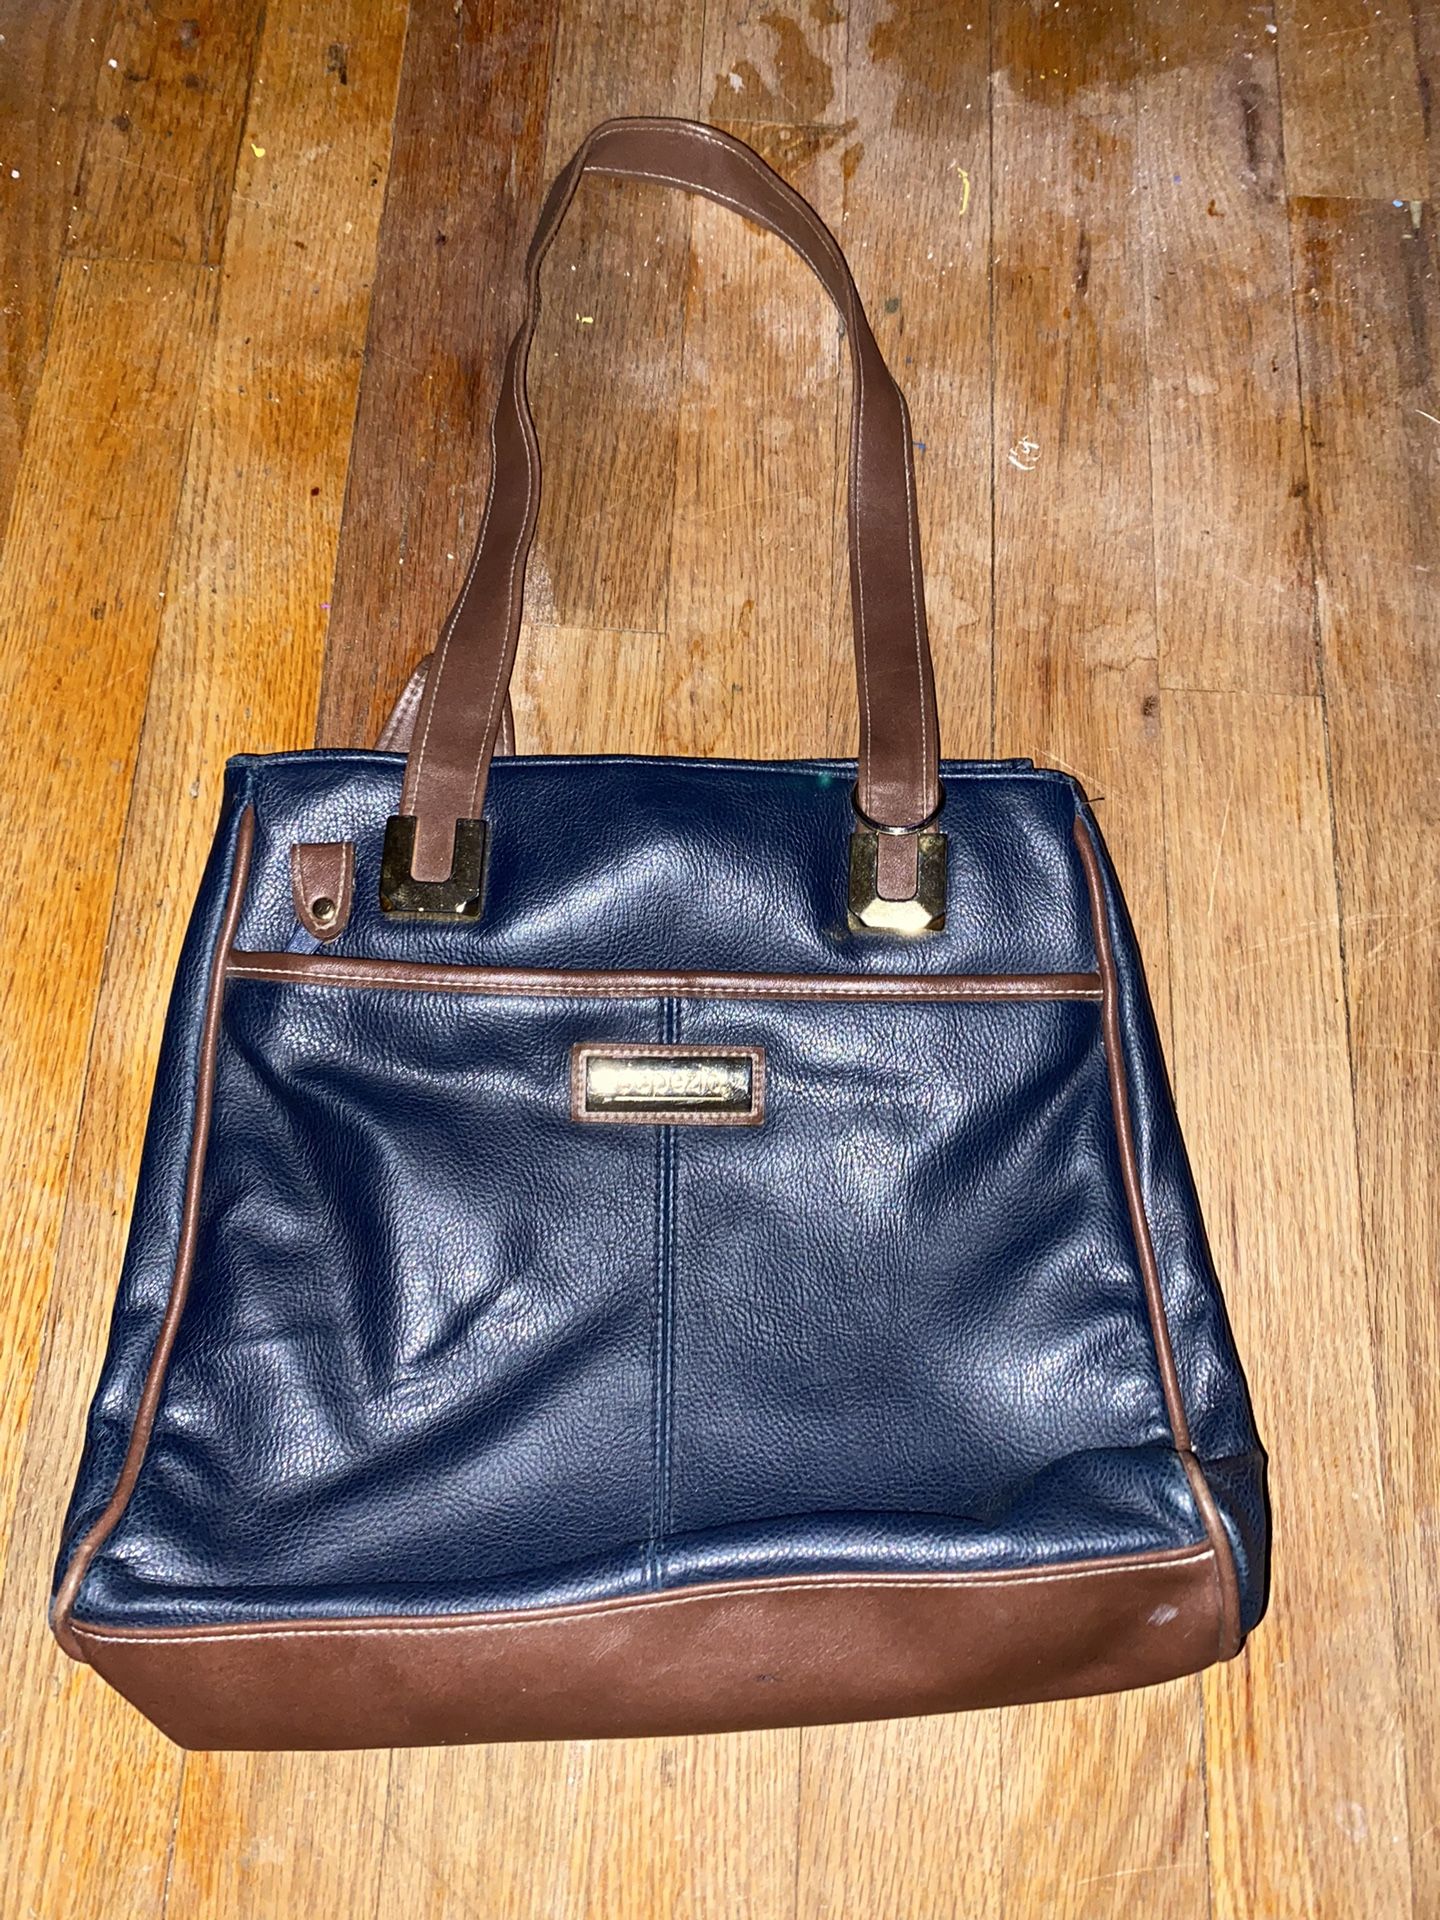 Blue And Brown Cute Bag